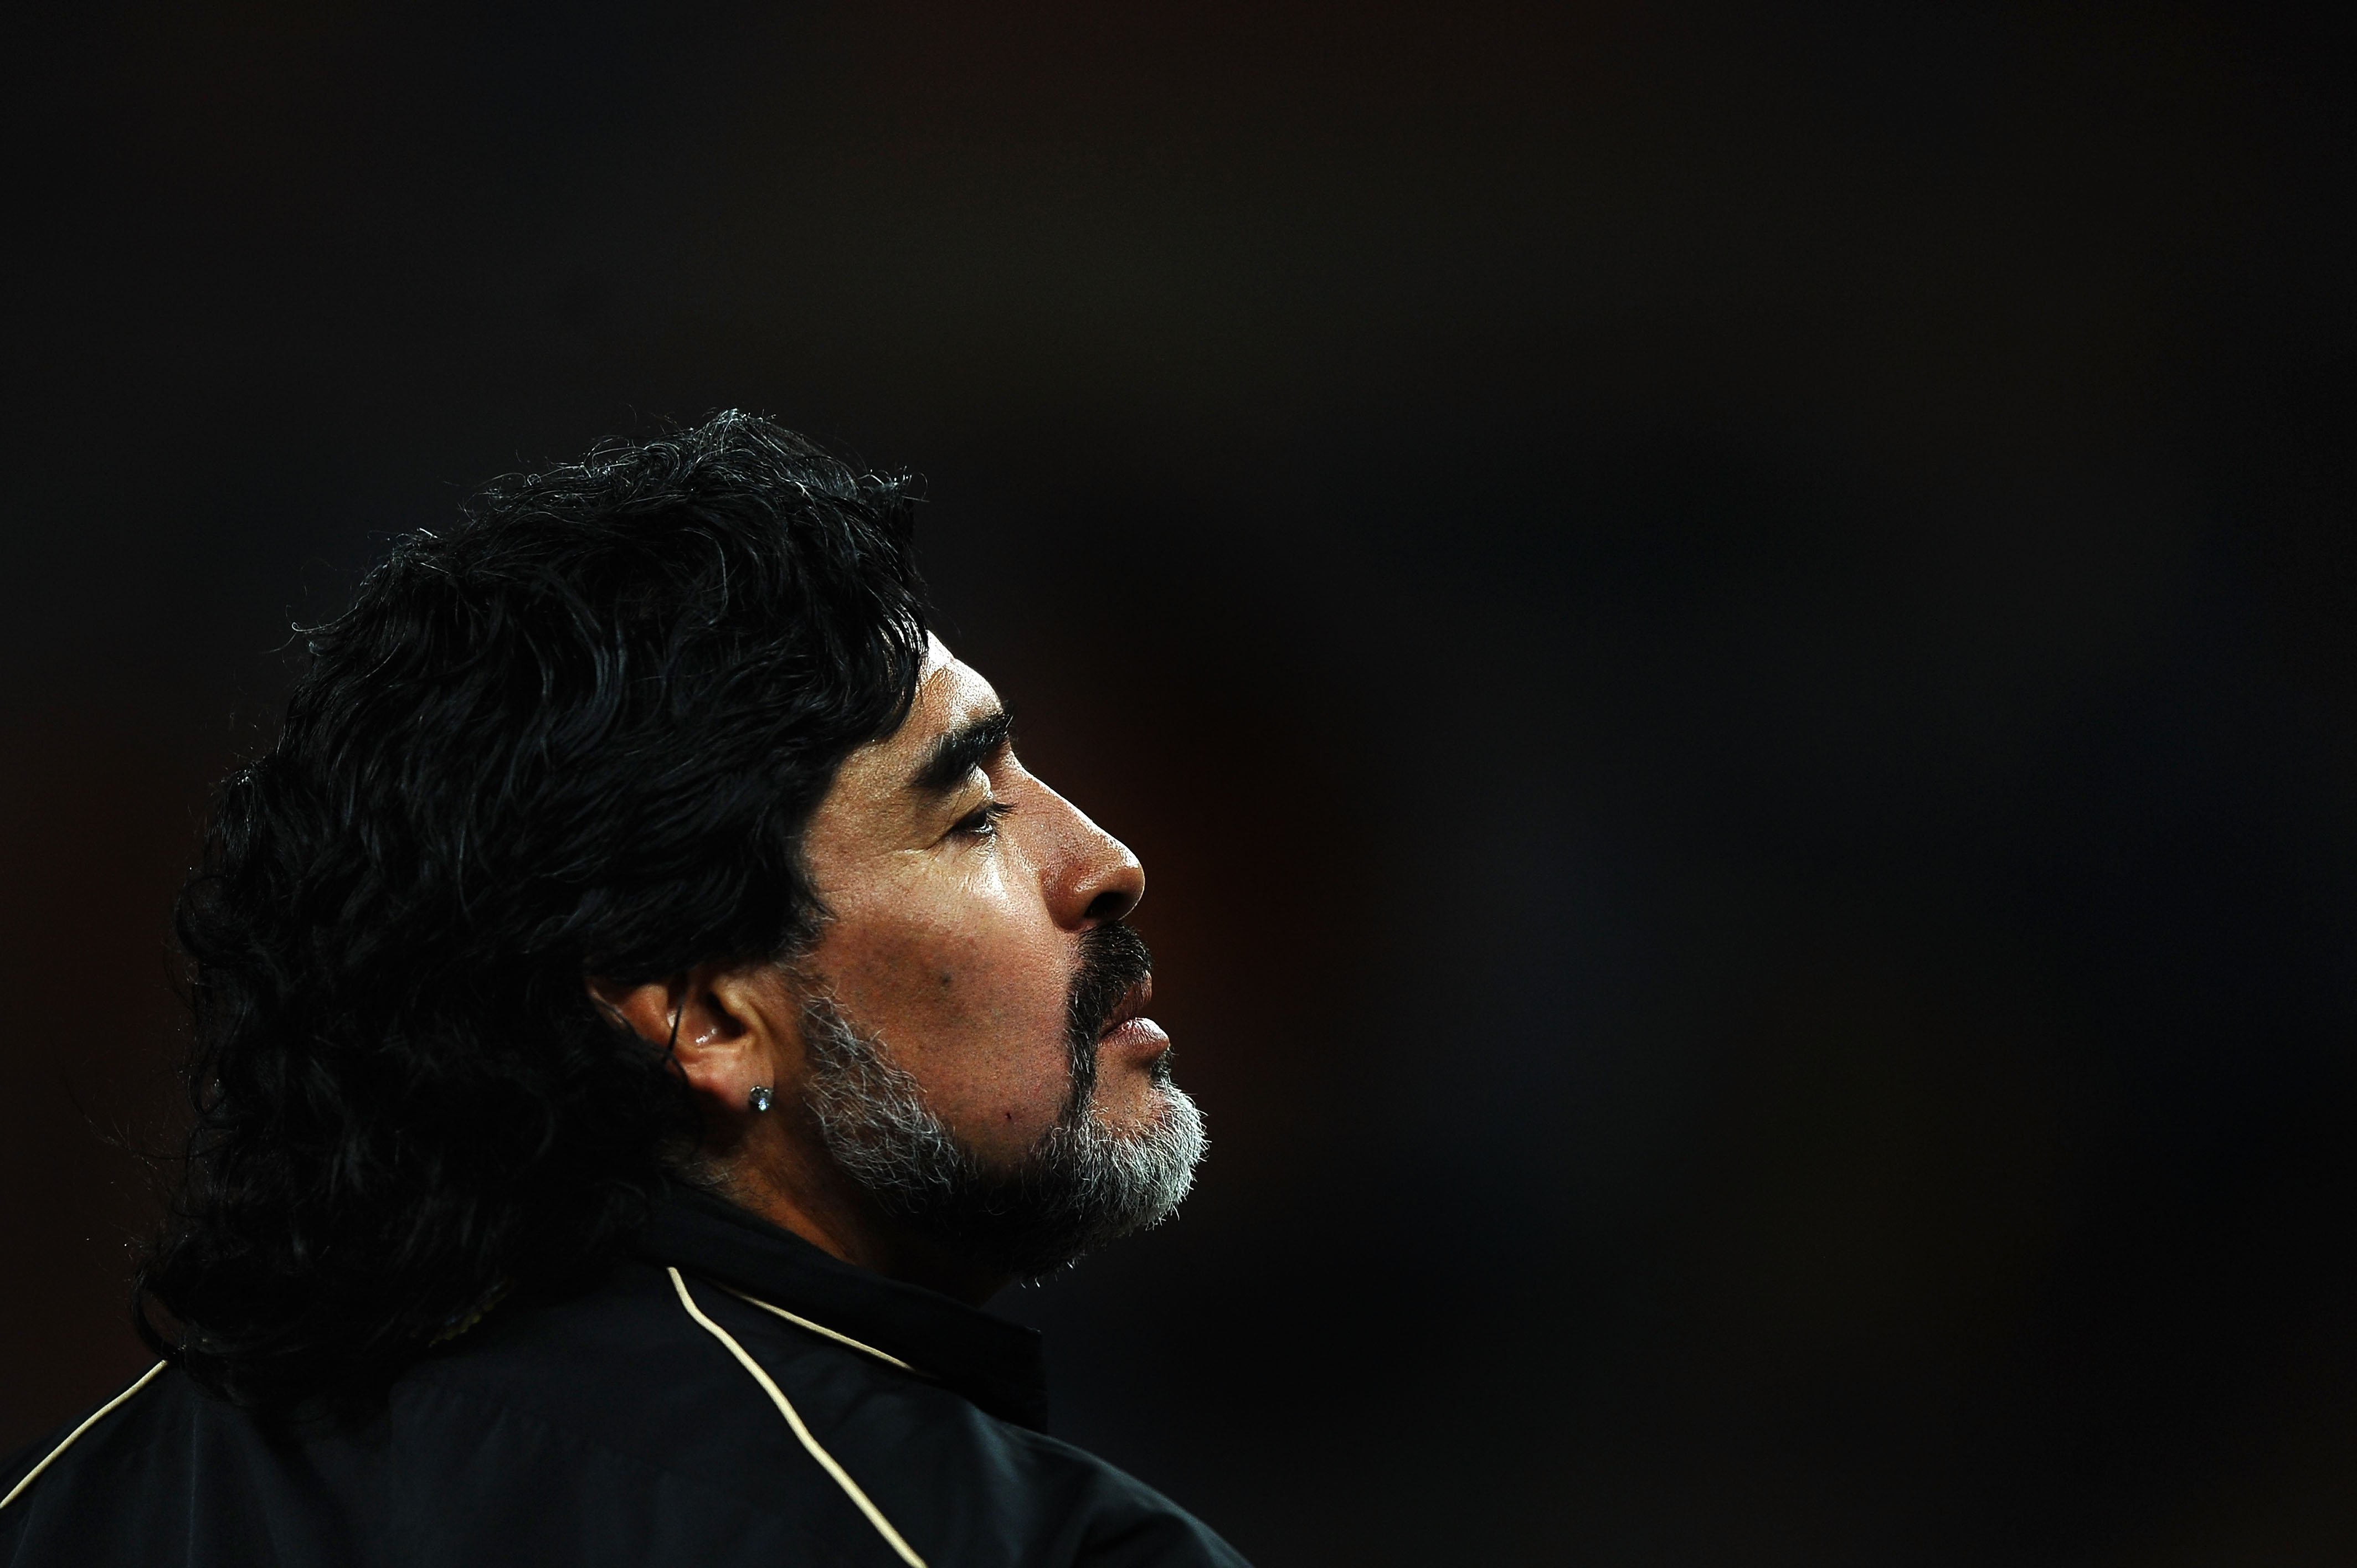 Diego Maradona at the 2010 FIFA World Cup South Africa Round of Sixteen match between Argentina and Mexico at Soccer City Stadium on June 27, 2010 in Johannesburg, South Africa. | Photo: Getty Images